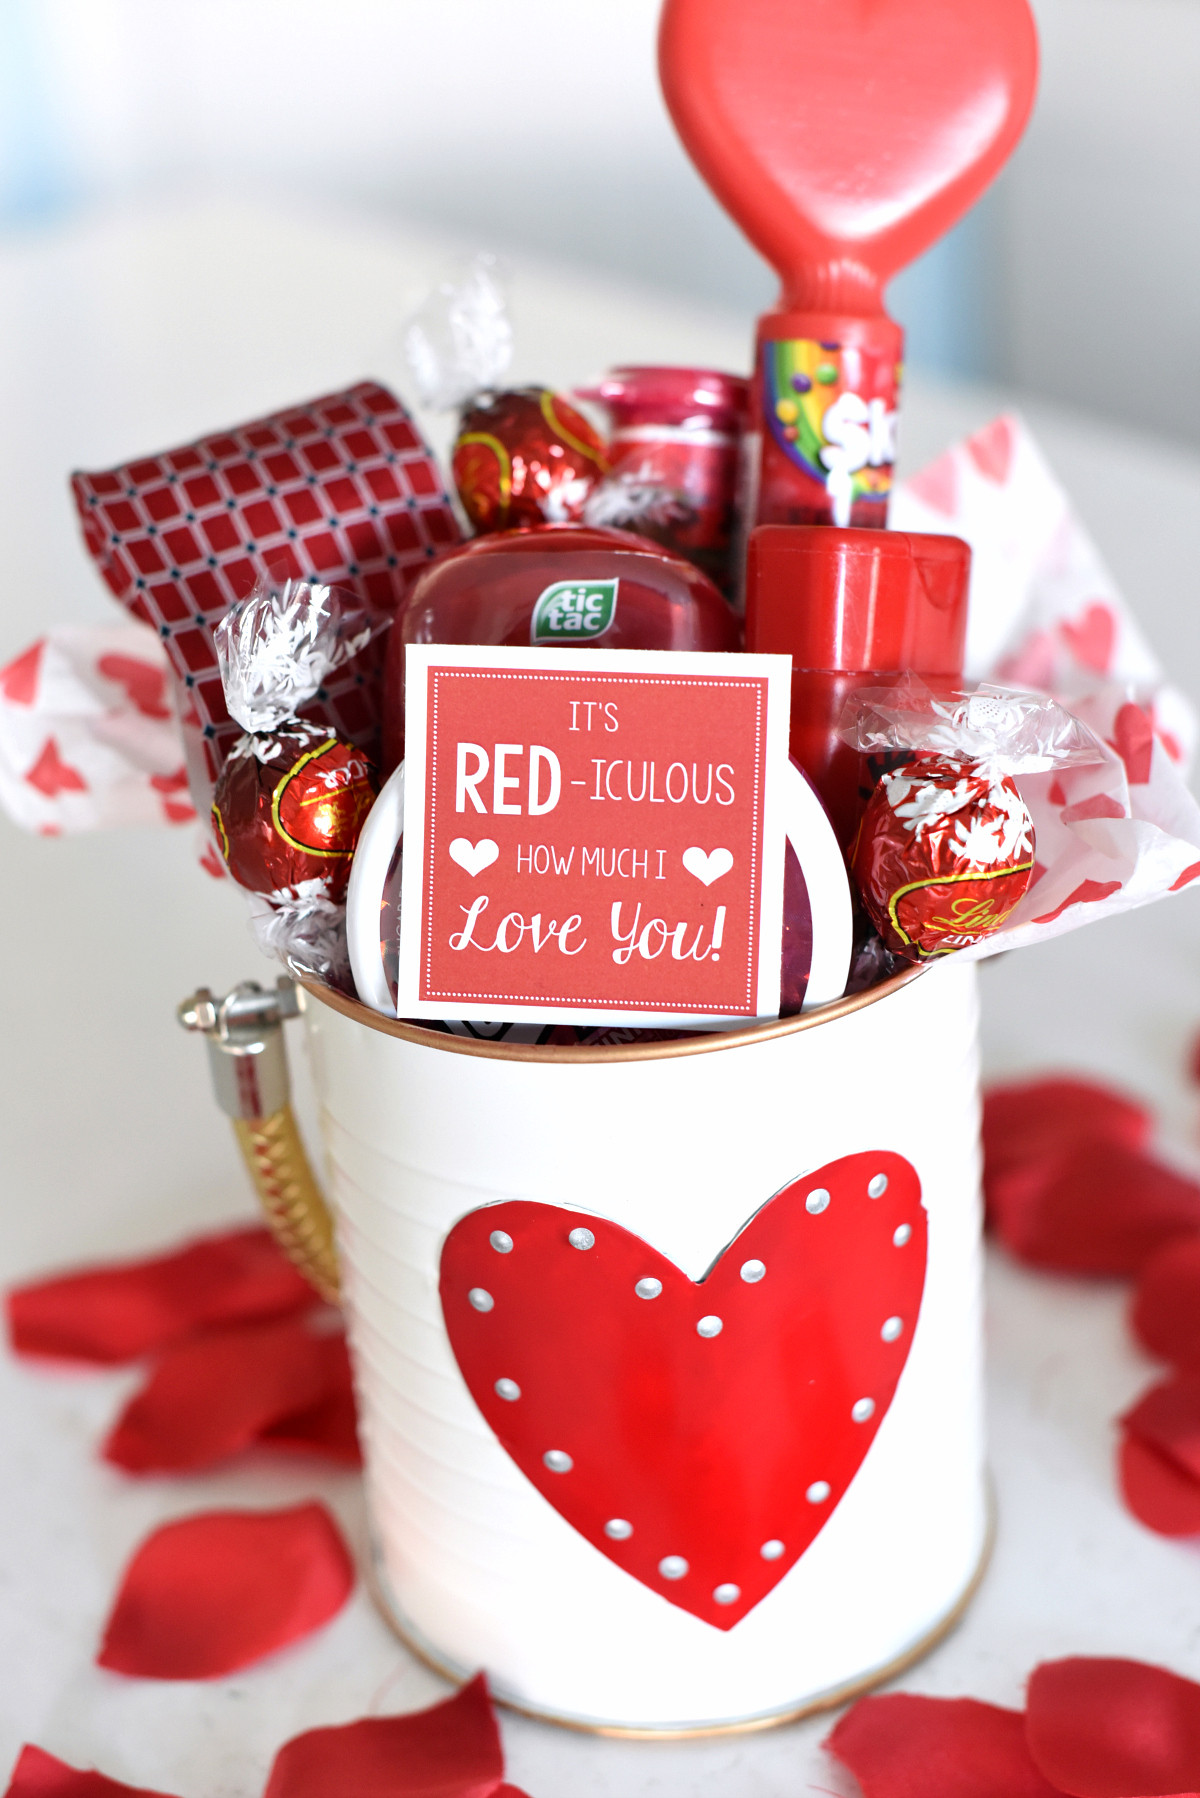 Romantic Gift Ideas For Him Valentines Day
 25 DIY Valentine s Day Gift Ideas Teens Will Love